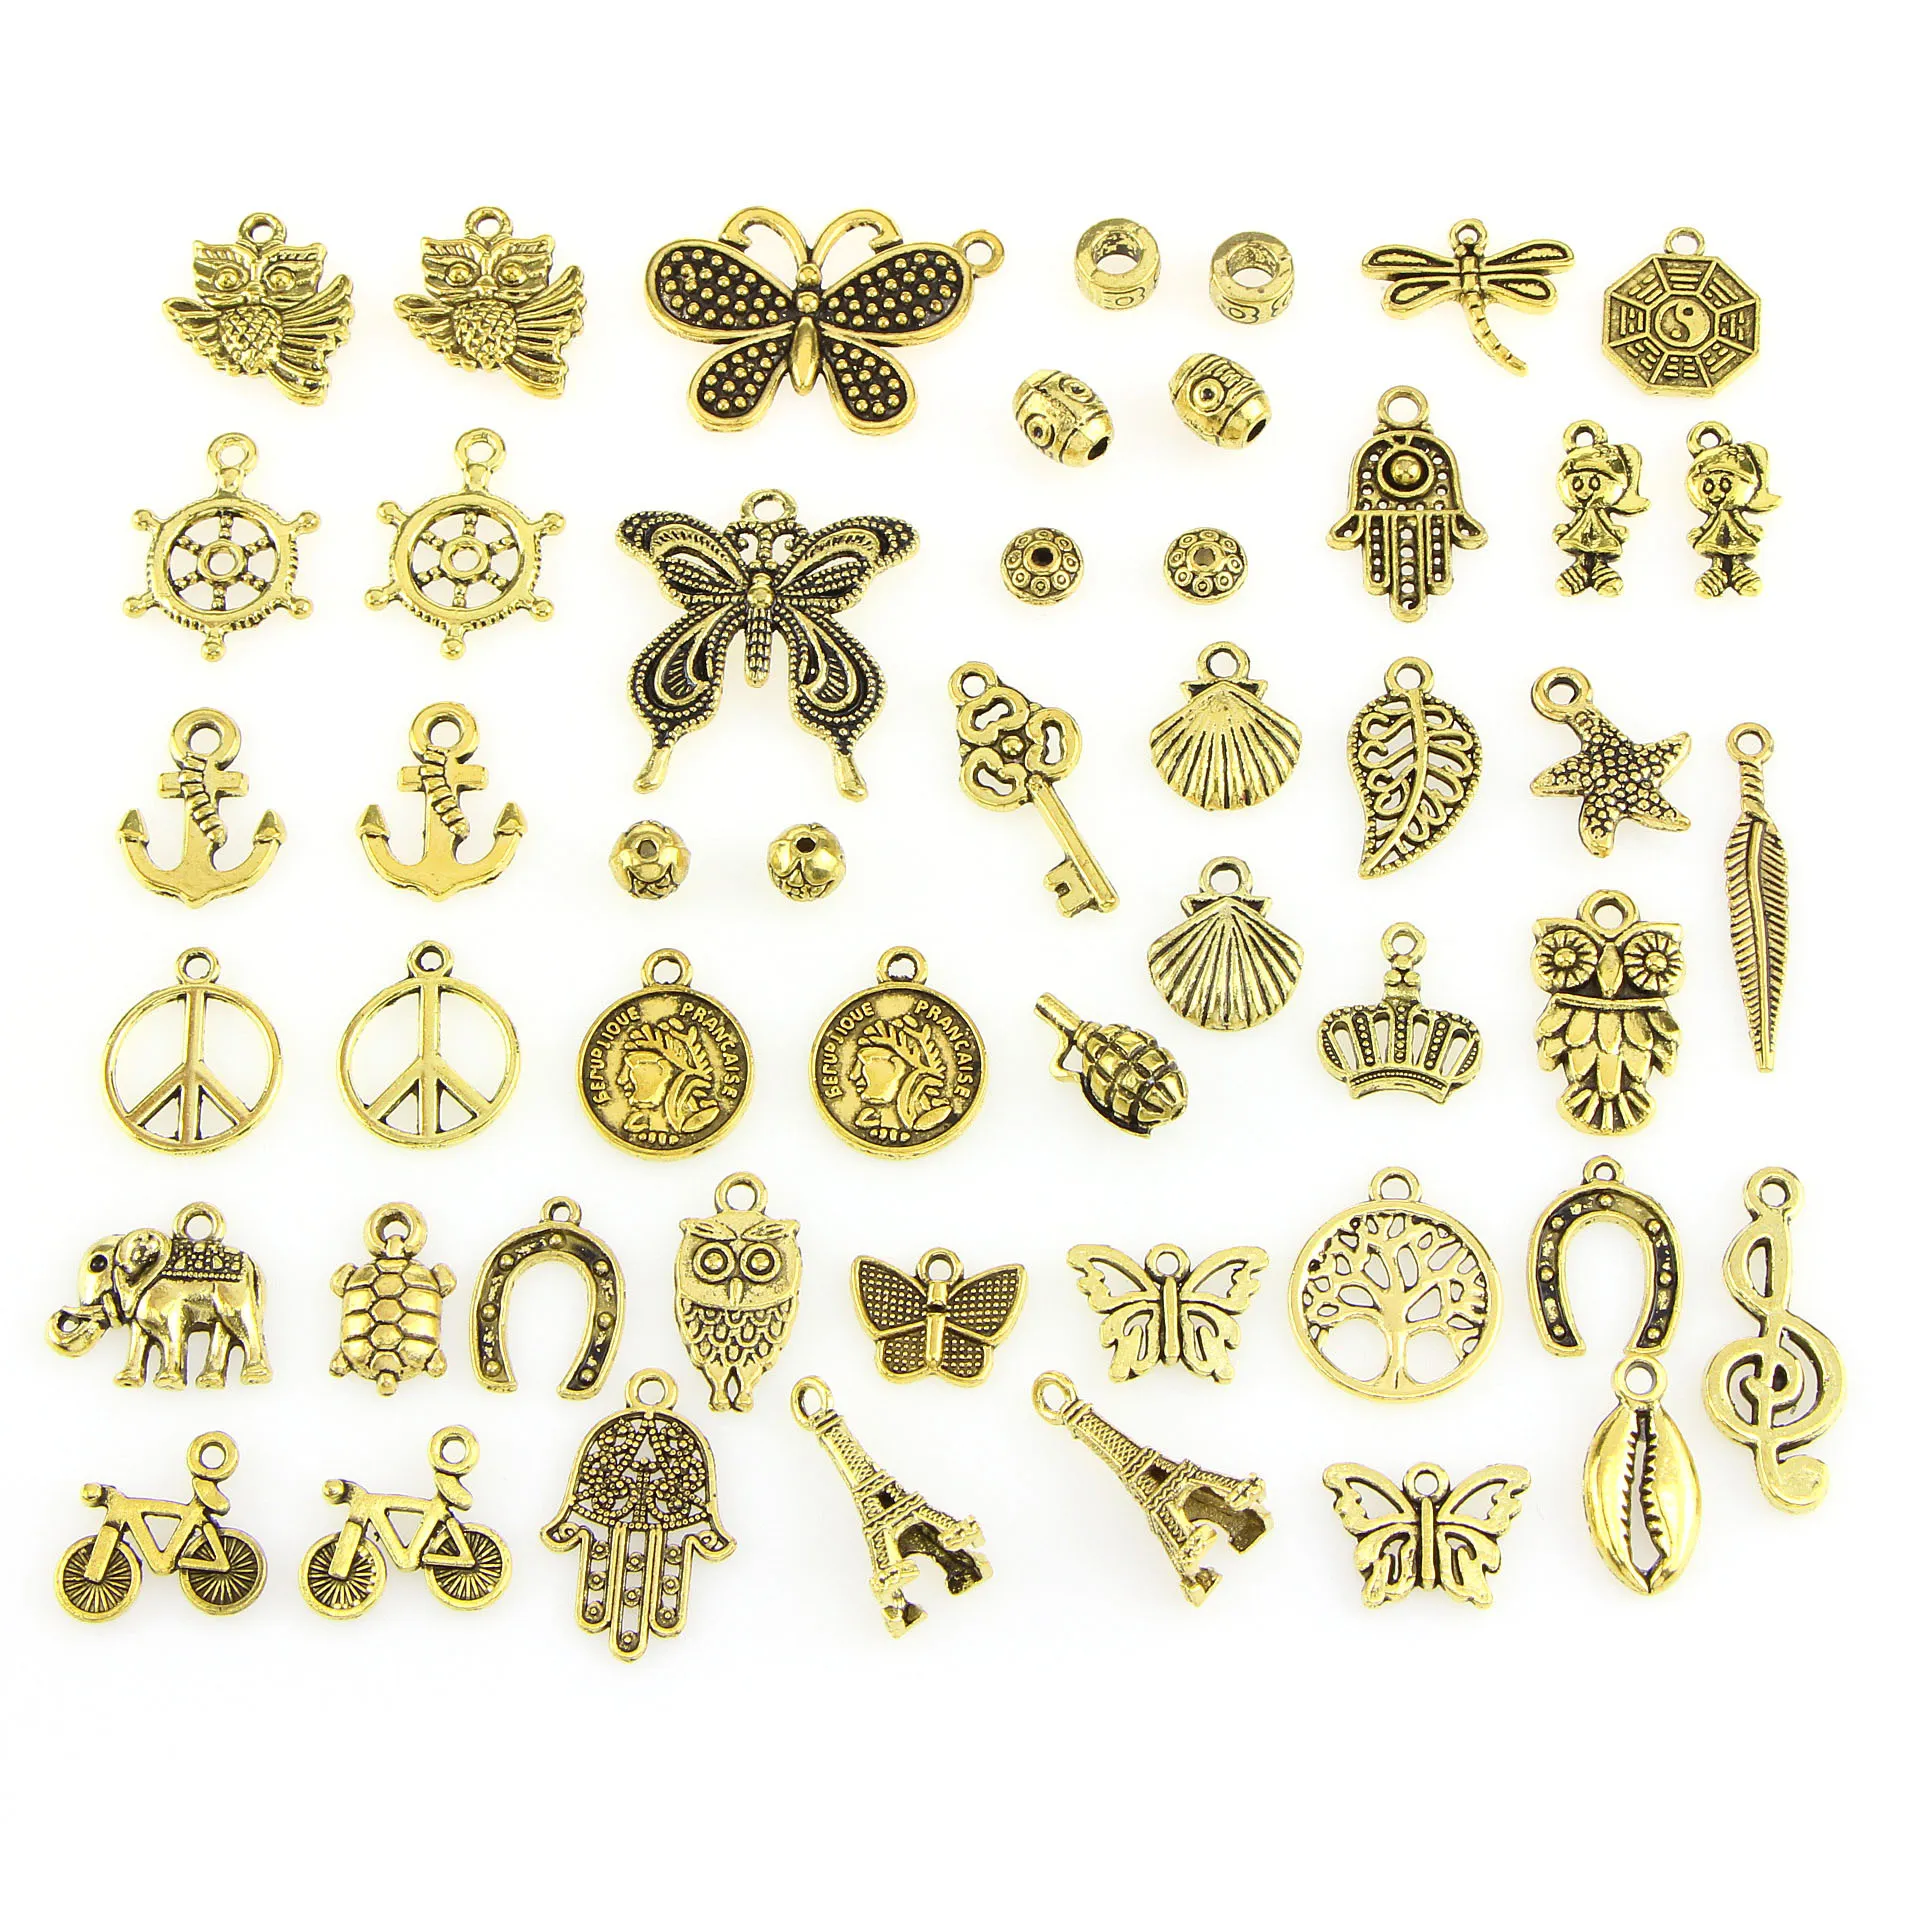 Mixed Designs Retro Golden Color Key Rudder Shell Turtle Bird Hand Tower Bike Butterfly Owl... Charms For DIY Jewelry Fitting 50pcs/bag